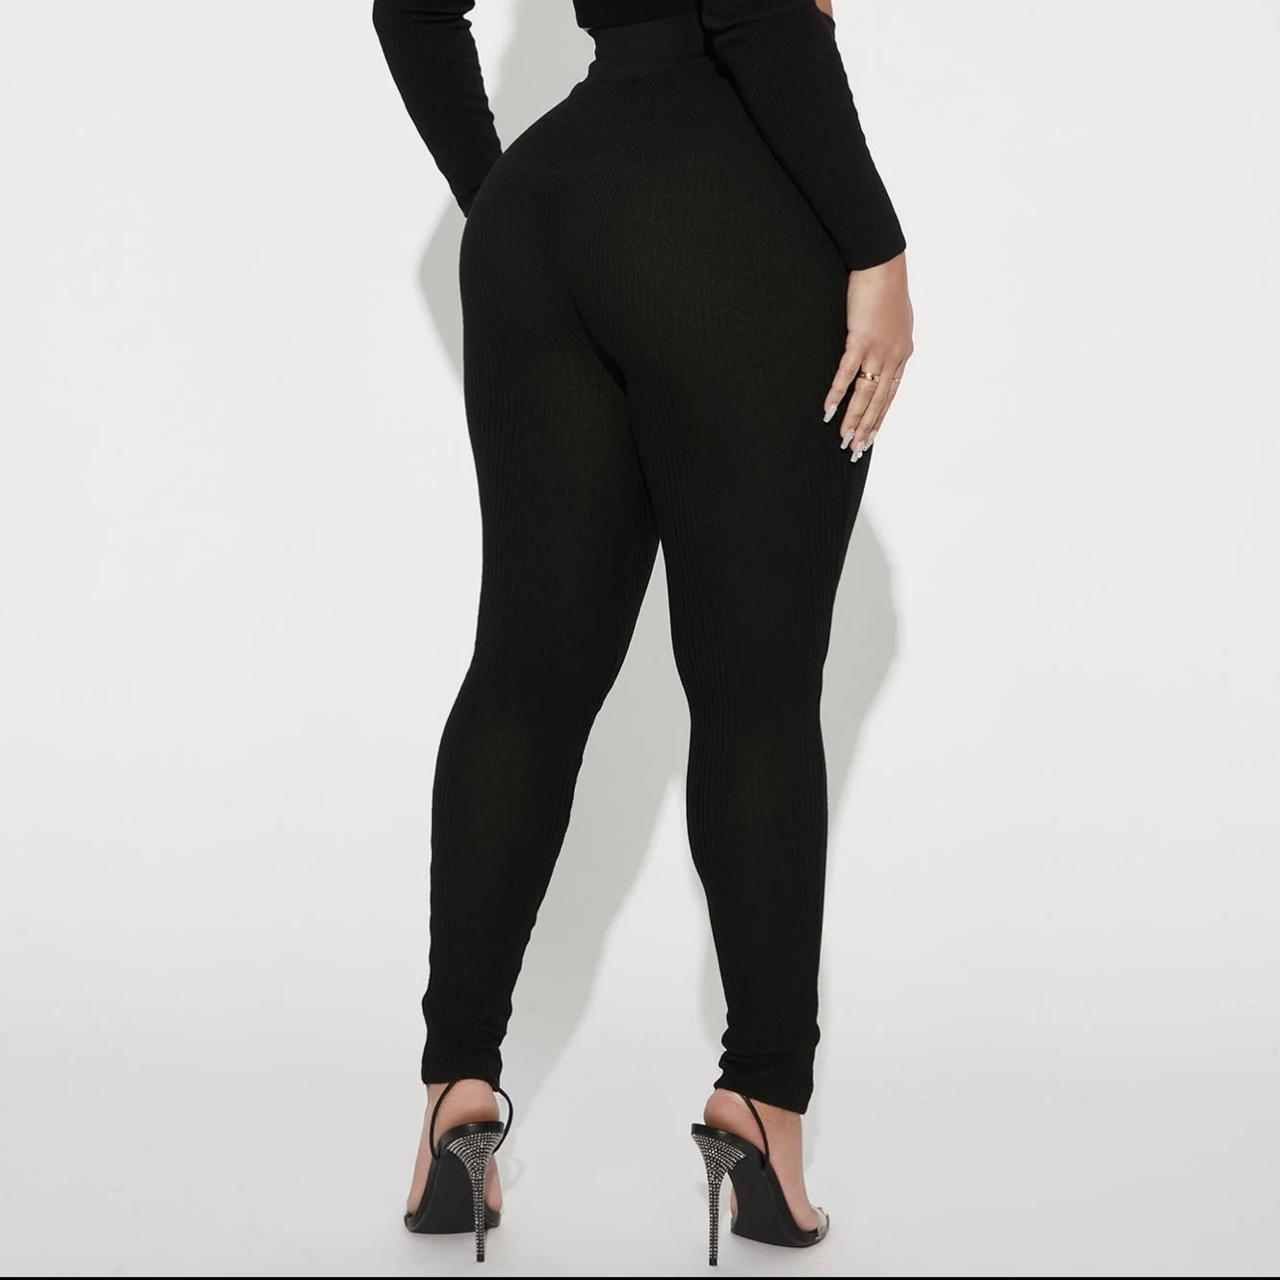 Just What You Needed Legging Set - Black